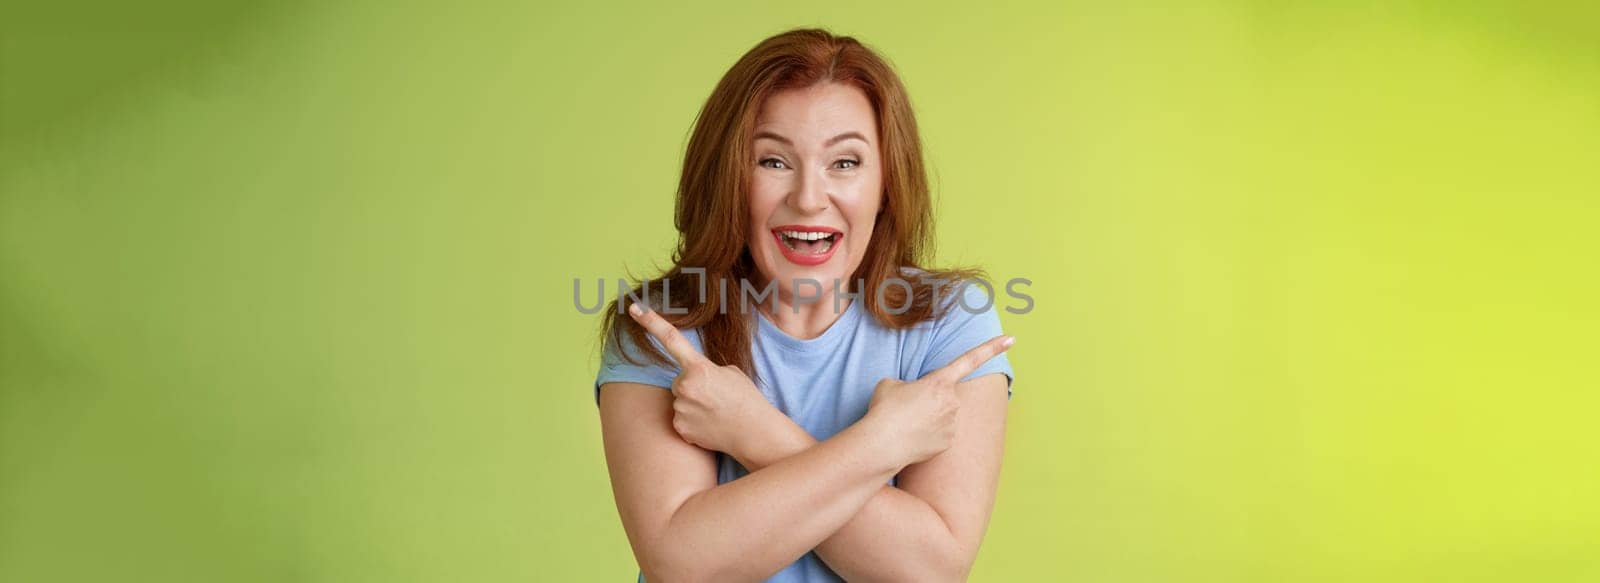 Lifestyle Concept - Happy carefree entushiastic redhead funny mature female. having fun positive attitude cross arms body pointing sideways show left right products laughing happily like both choices green background.